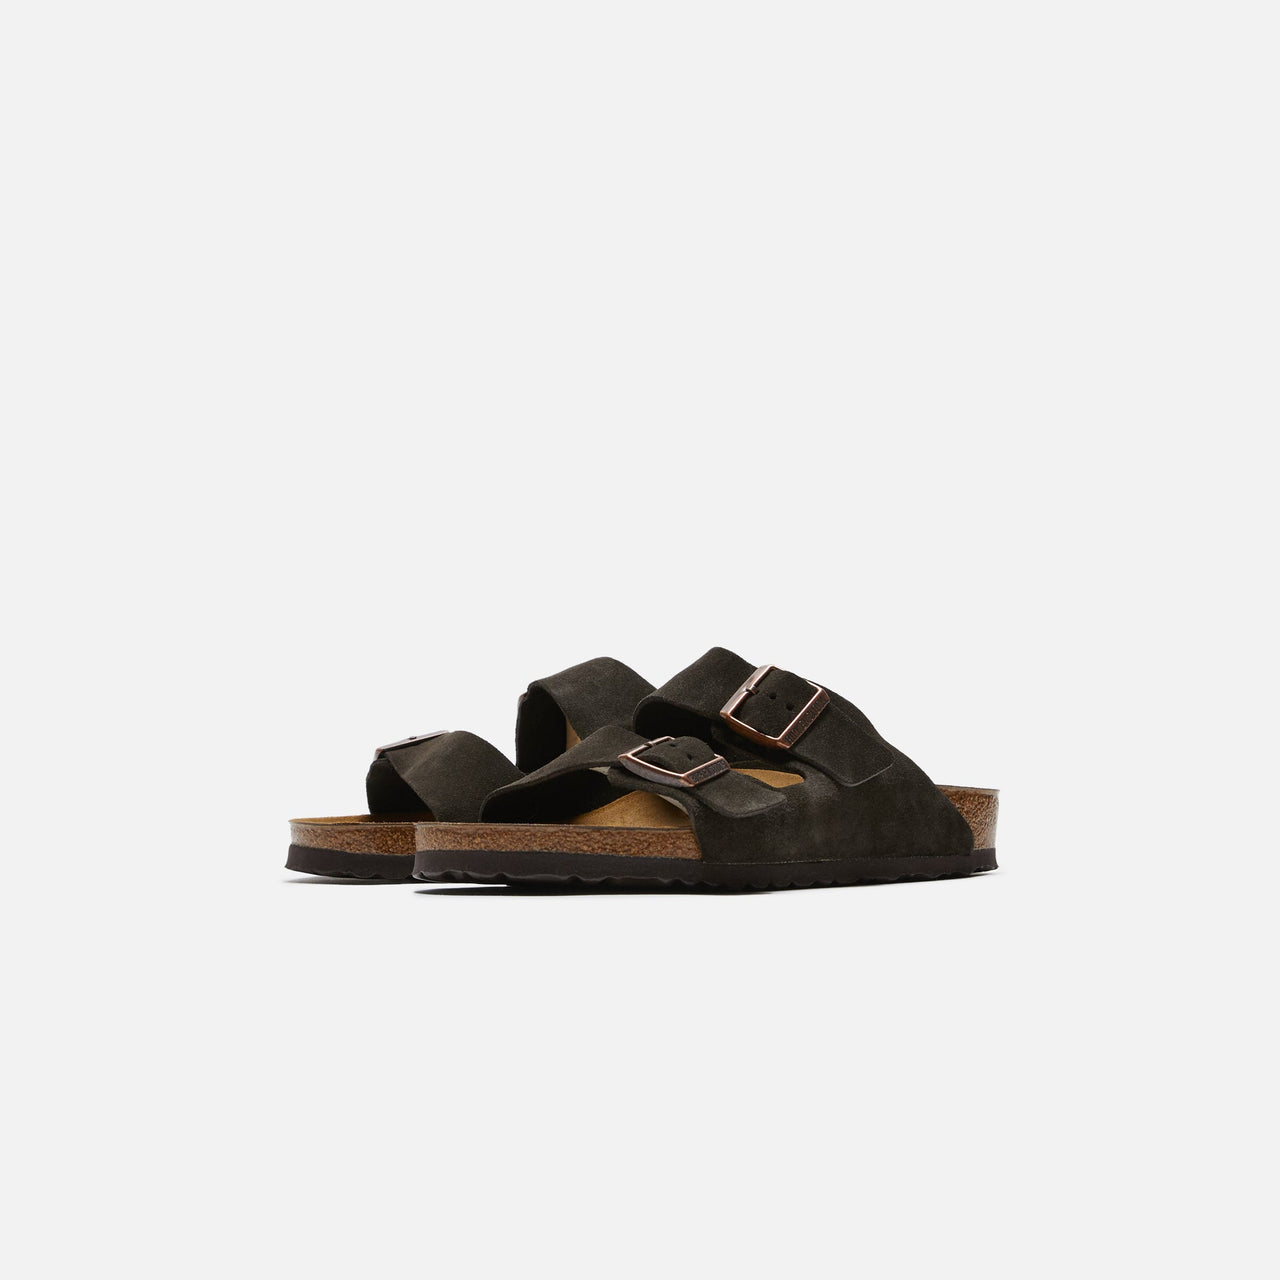  Close-up of the suede material in mocha color on Birkenstock Arizona sandal 